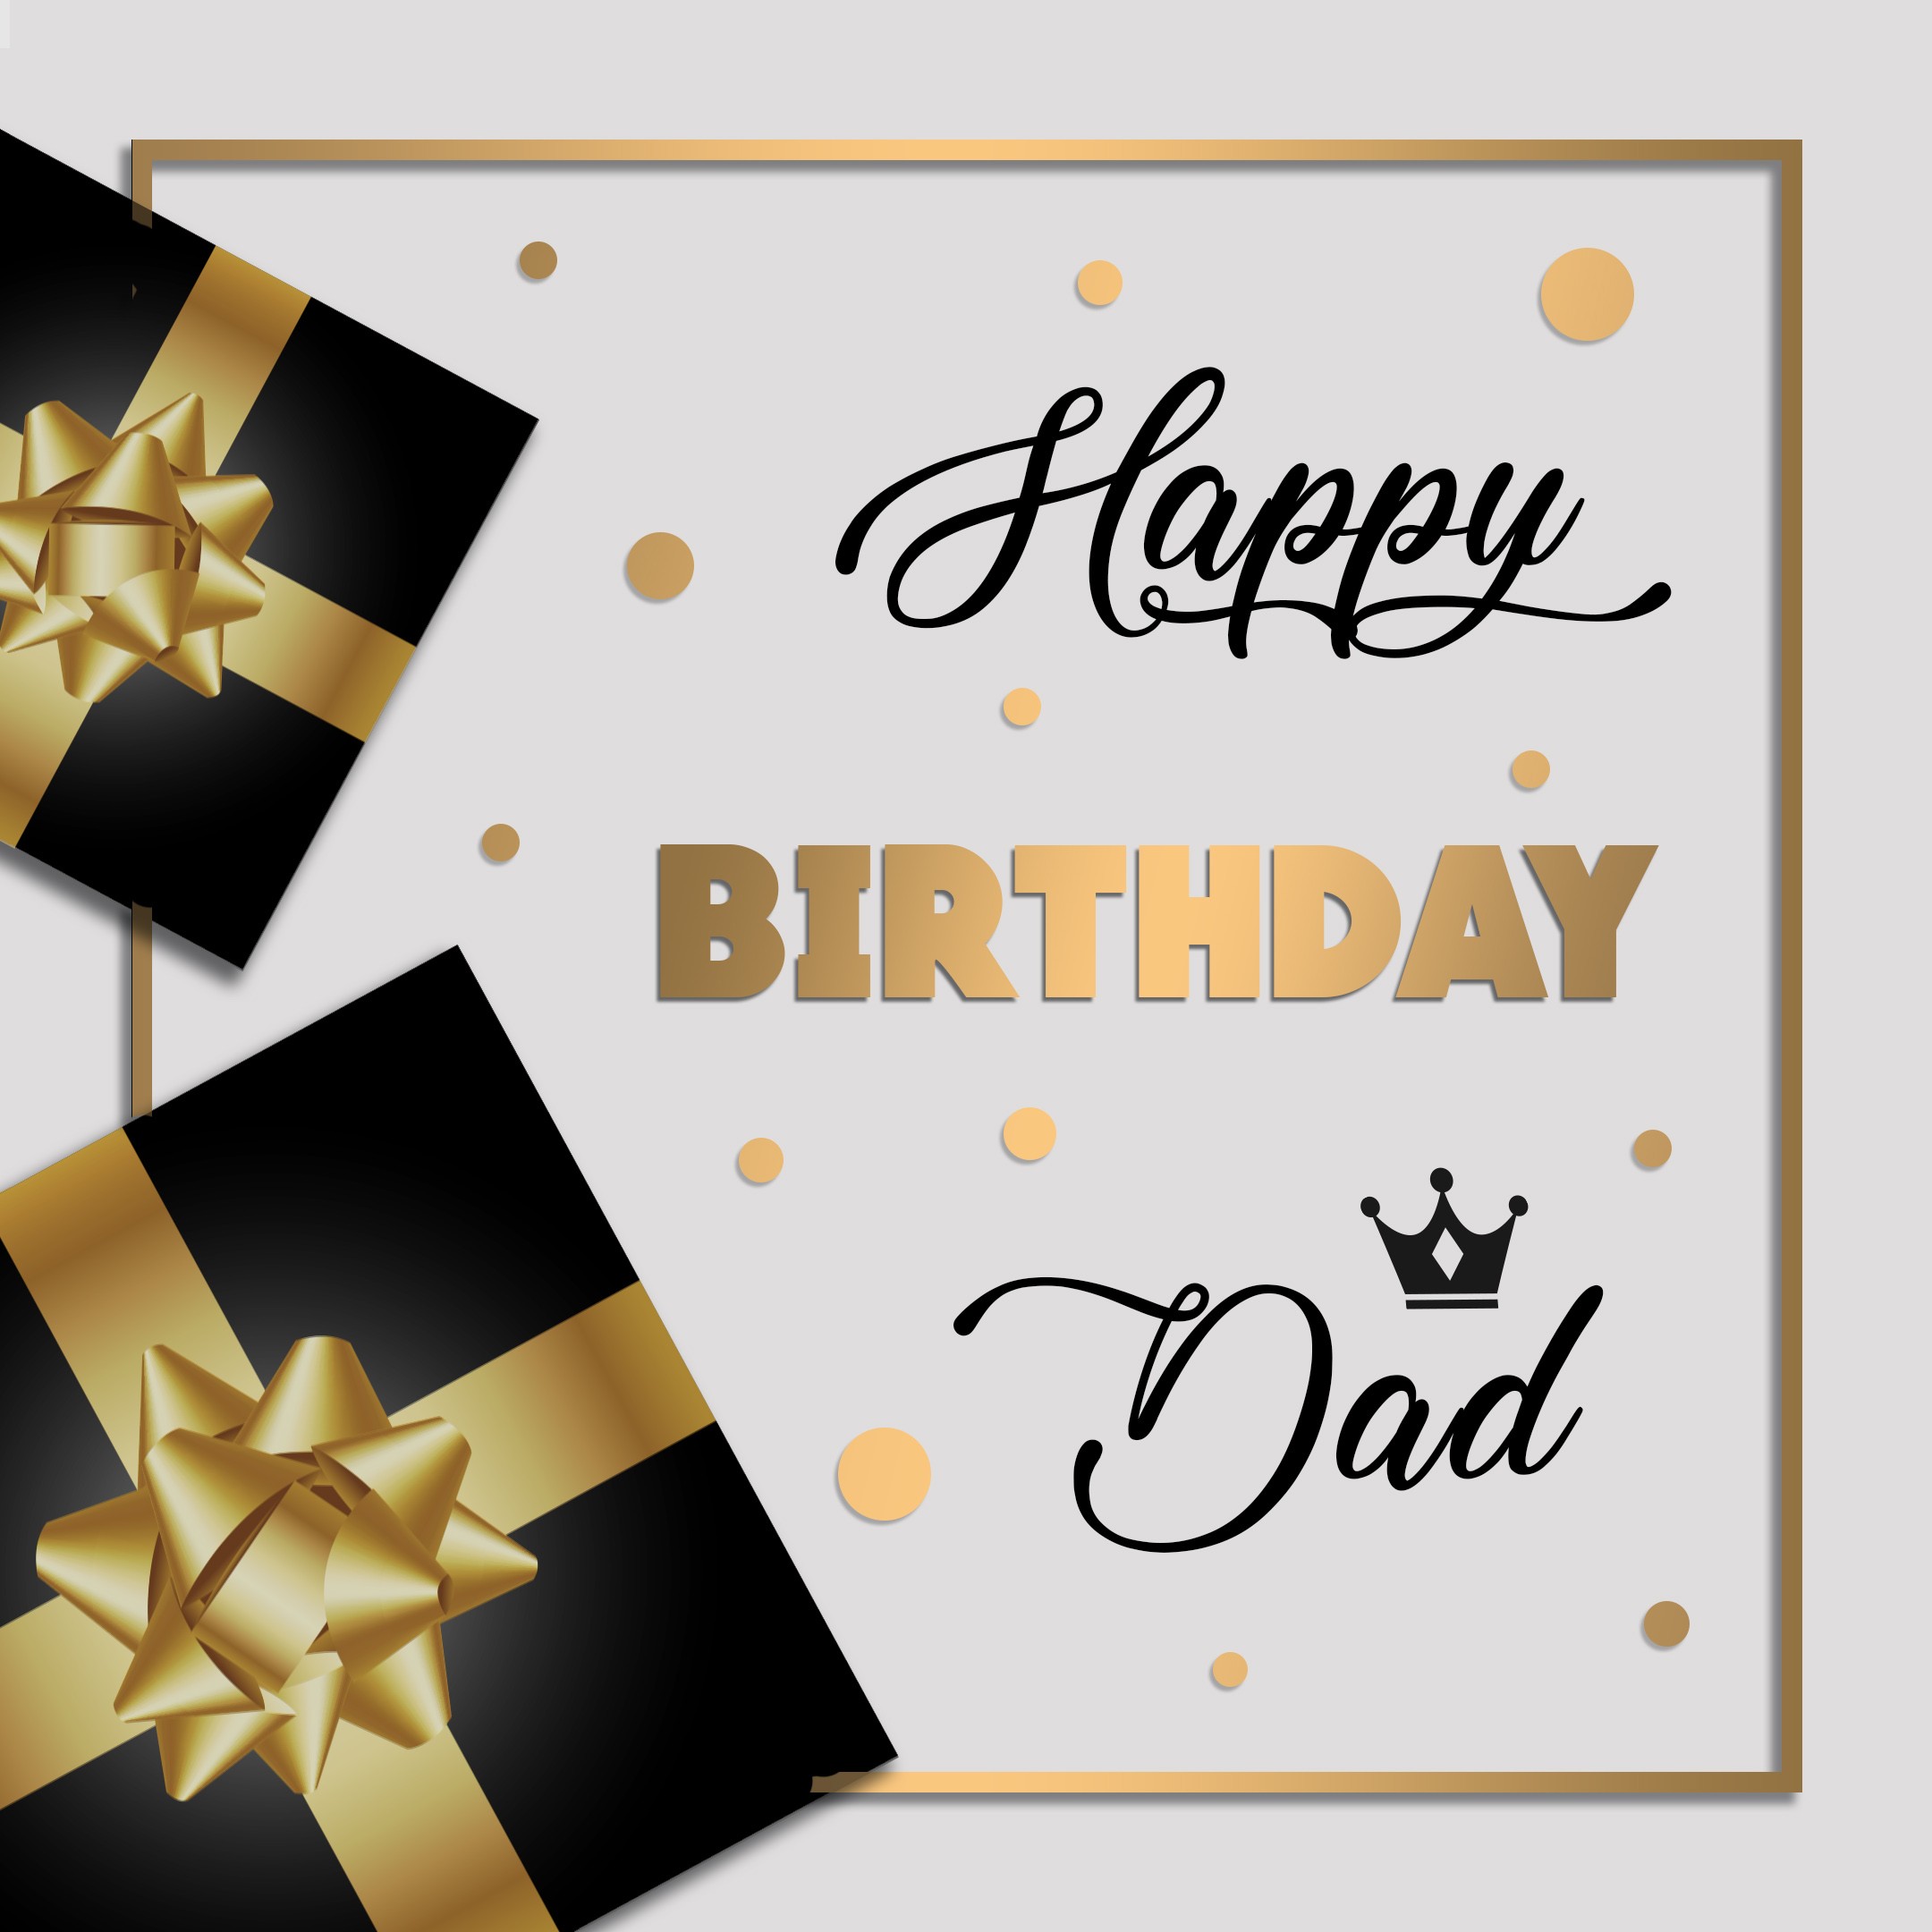 Free Happy Birthday Image For Dad With Gifts - birthdayimg.com